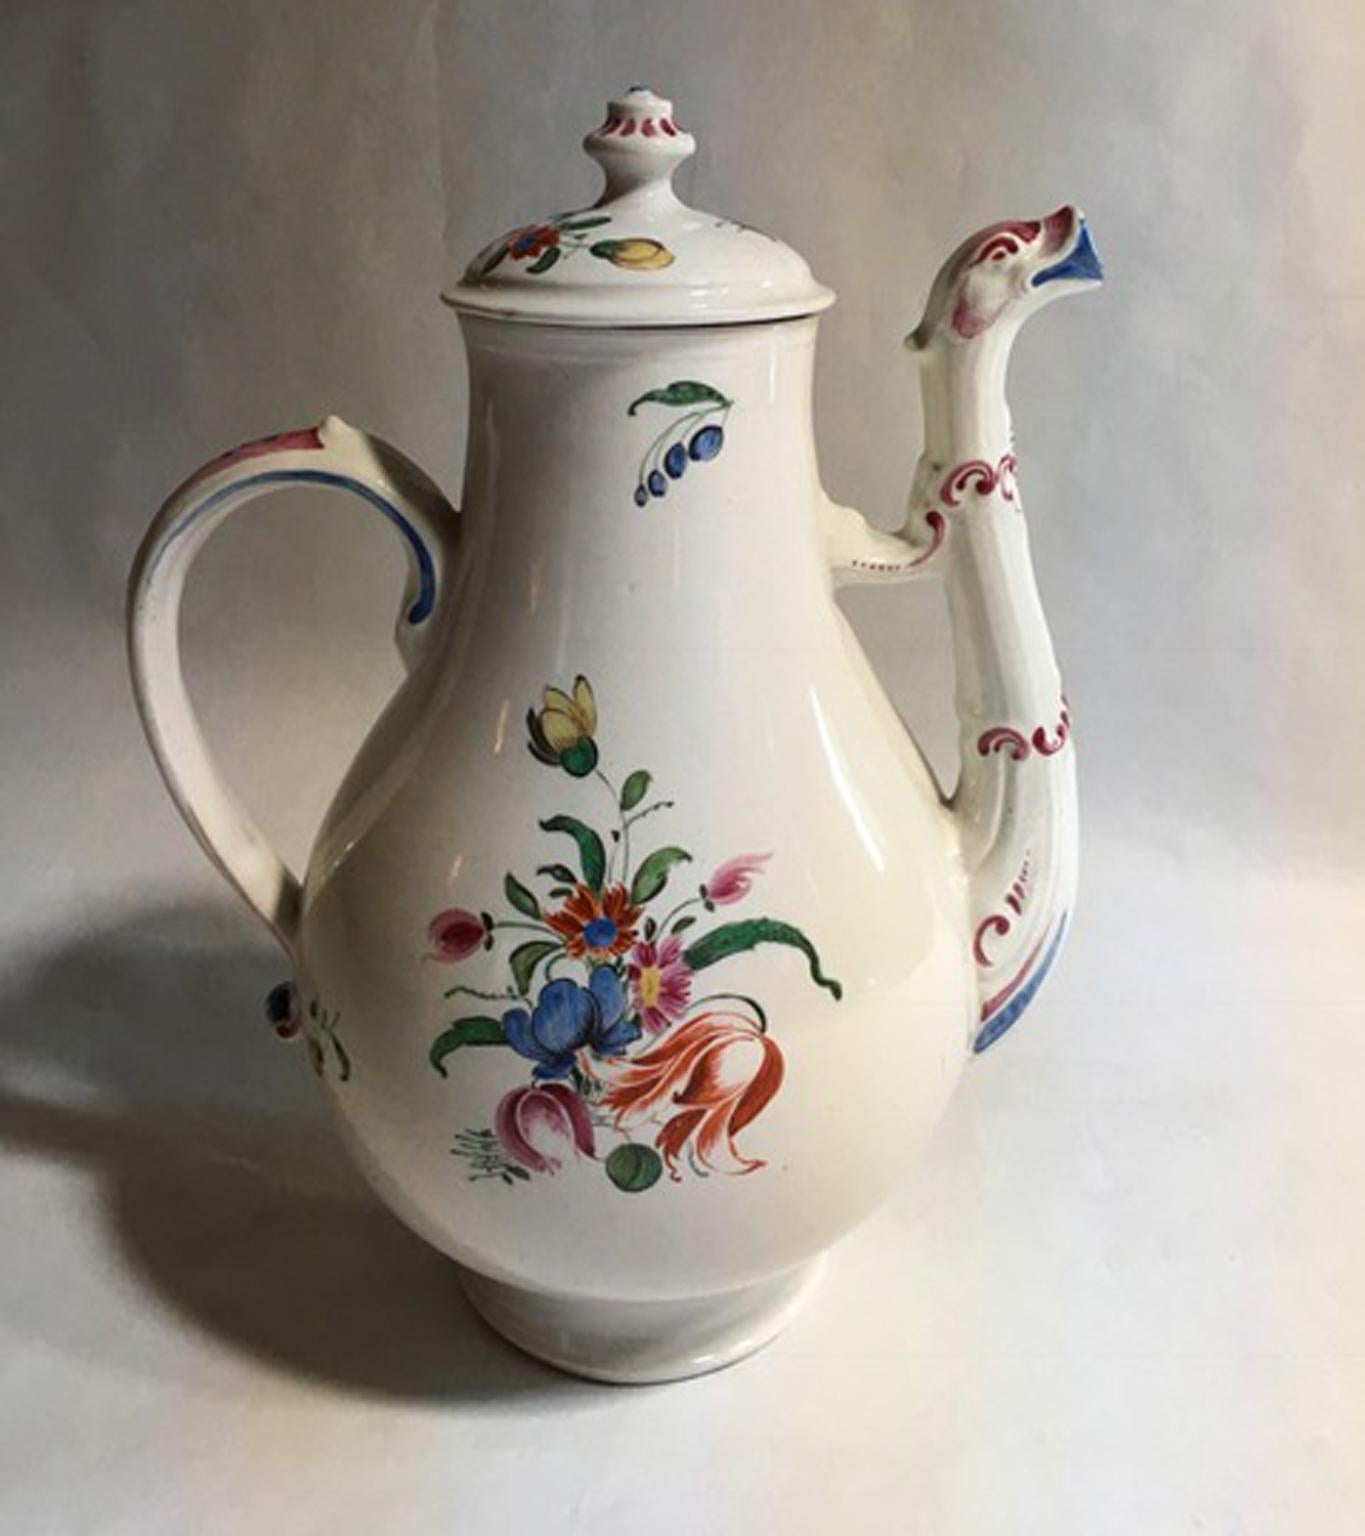 This is a beautiful piece in Italian porcelain handmade by Richard Ginori, 18th century. The high quality of this Italian production of Doccia, is recognizable at first glance. The flower decoration with orange tulip and a multi-color country